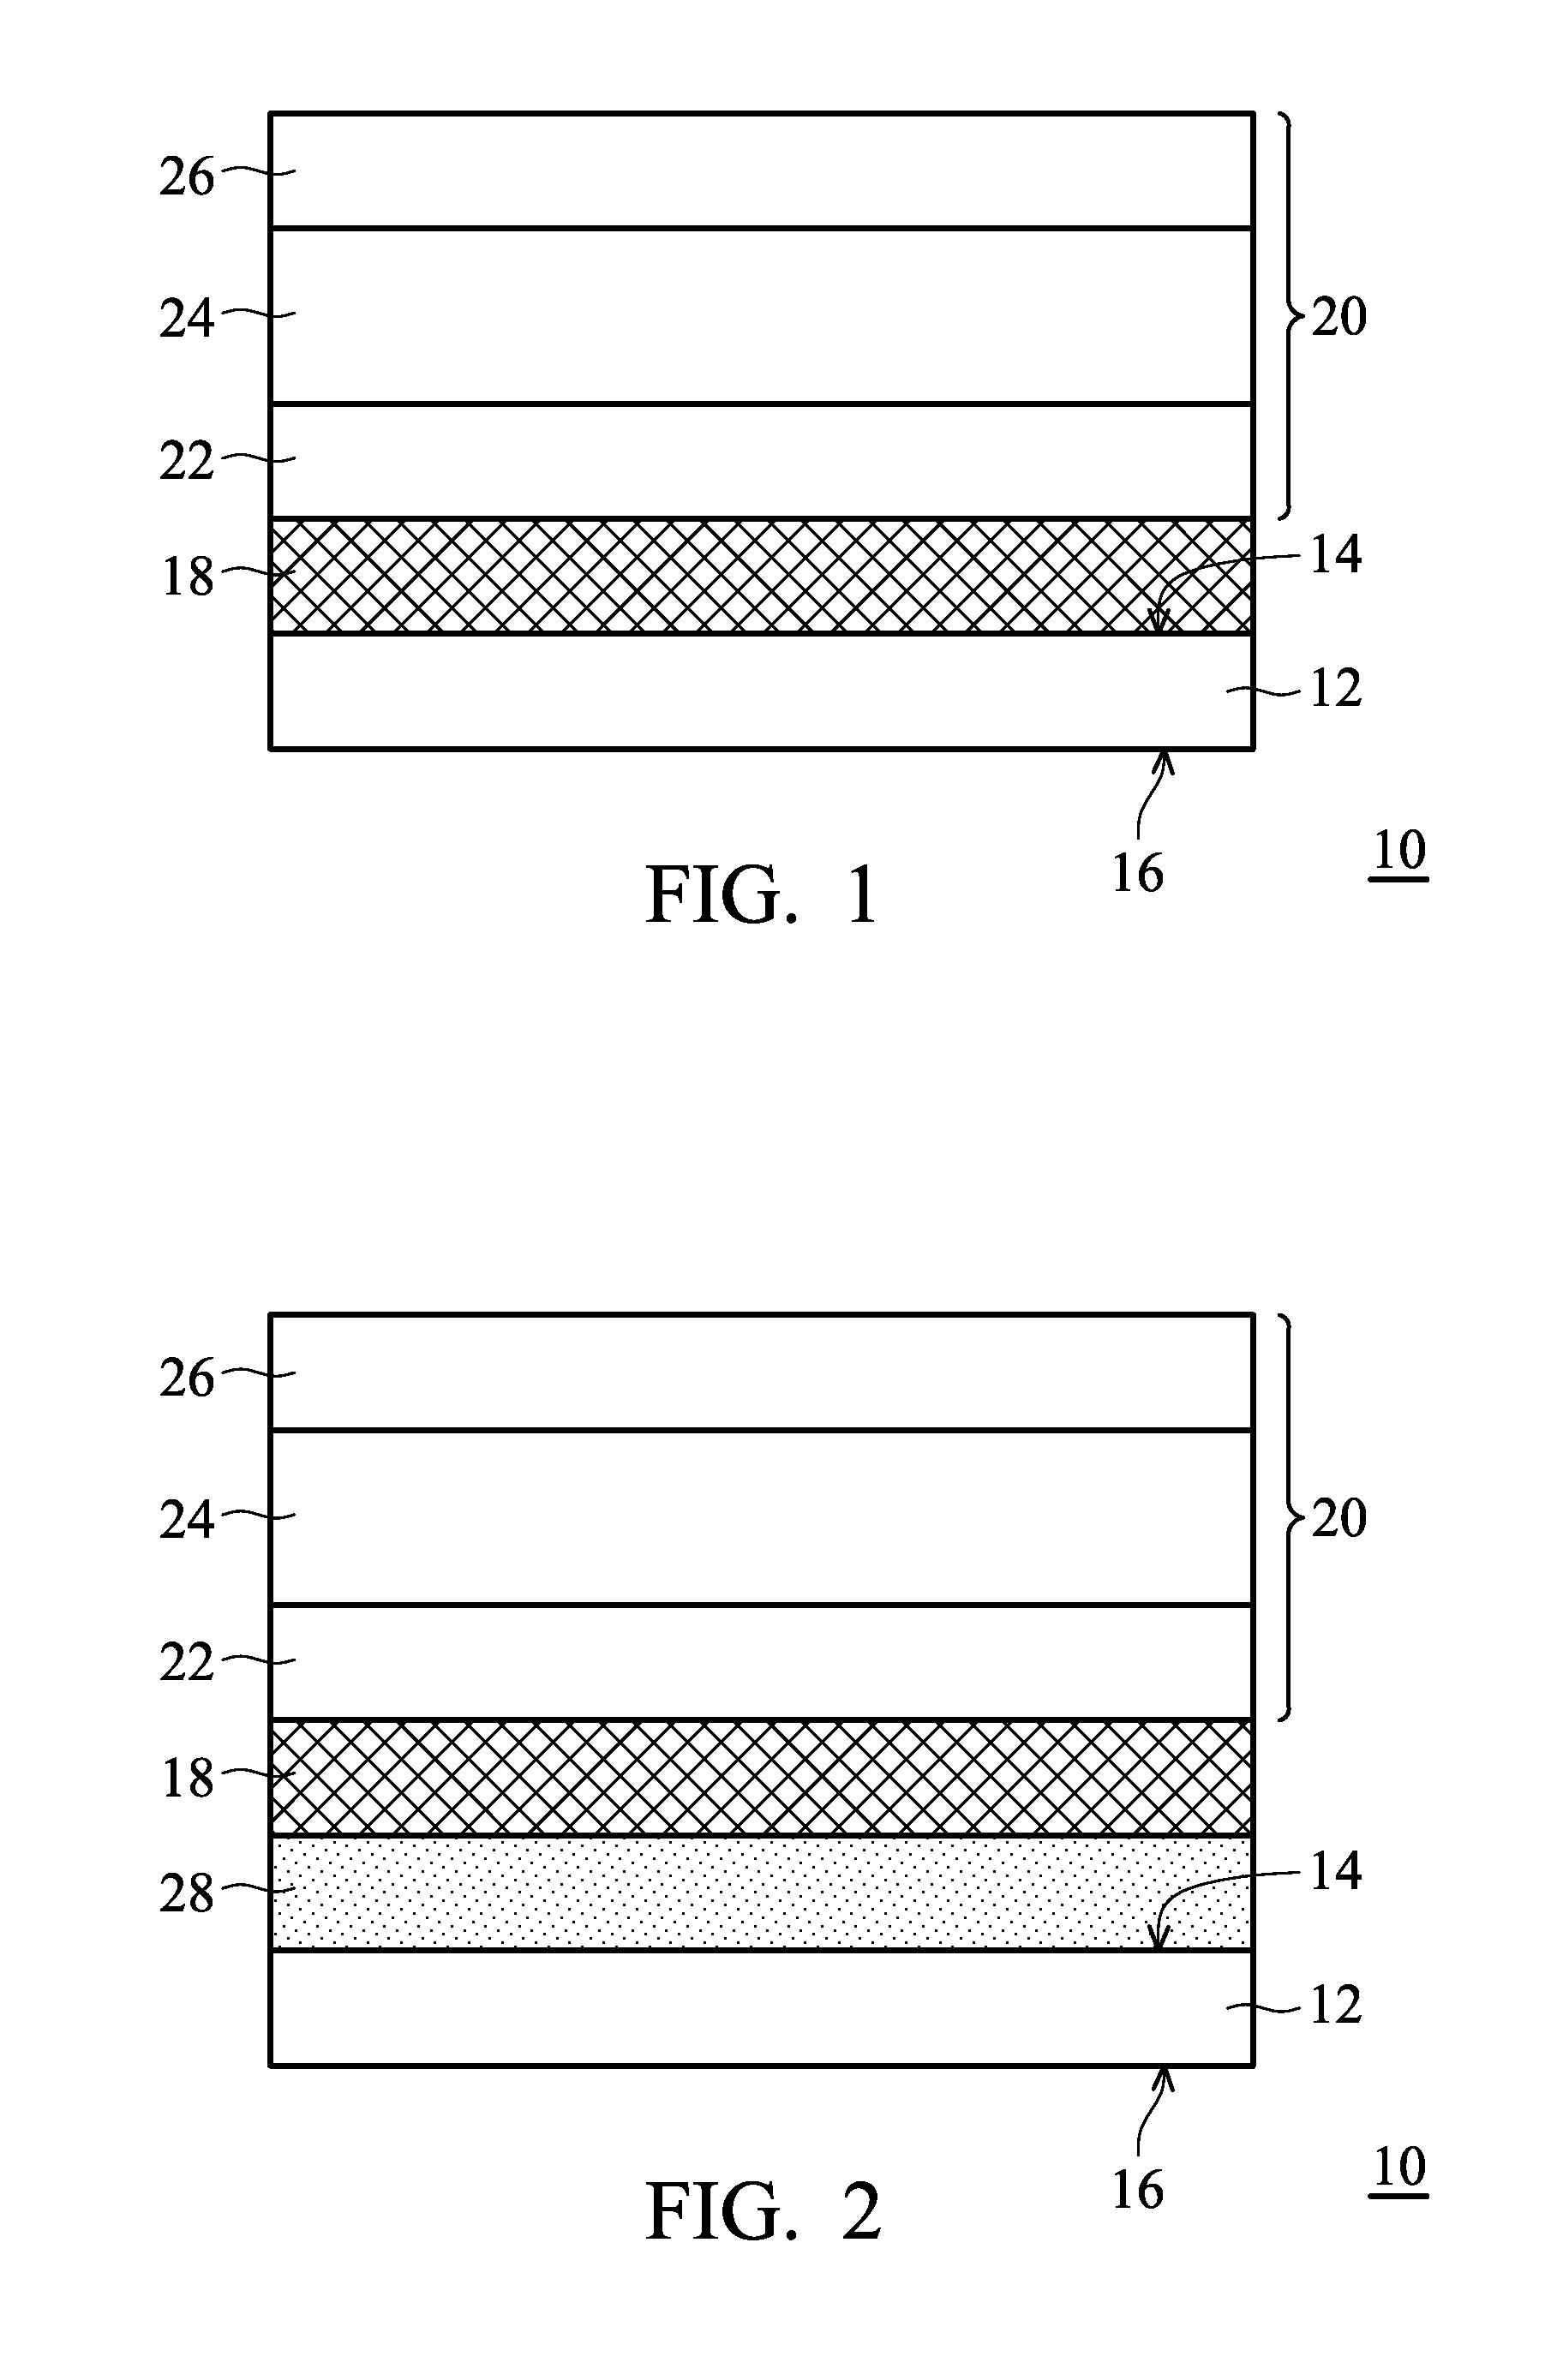 Optical device structures with the light outcoupling layers